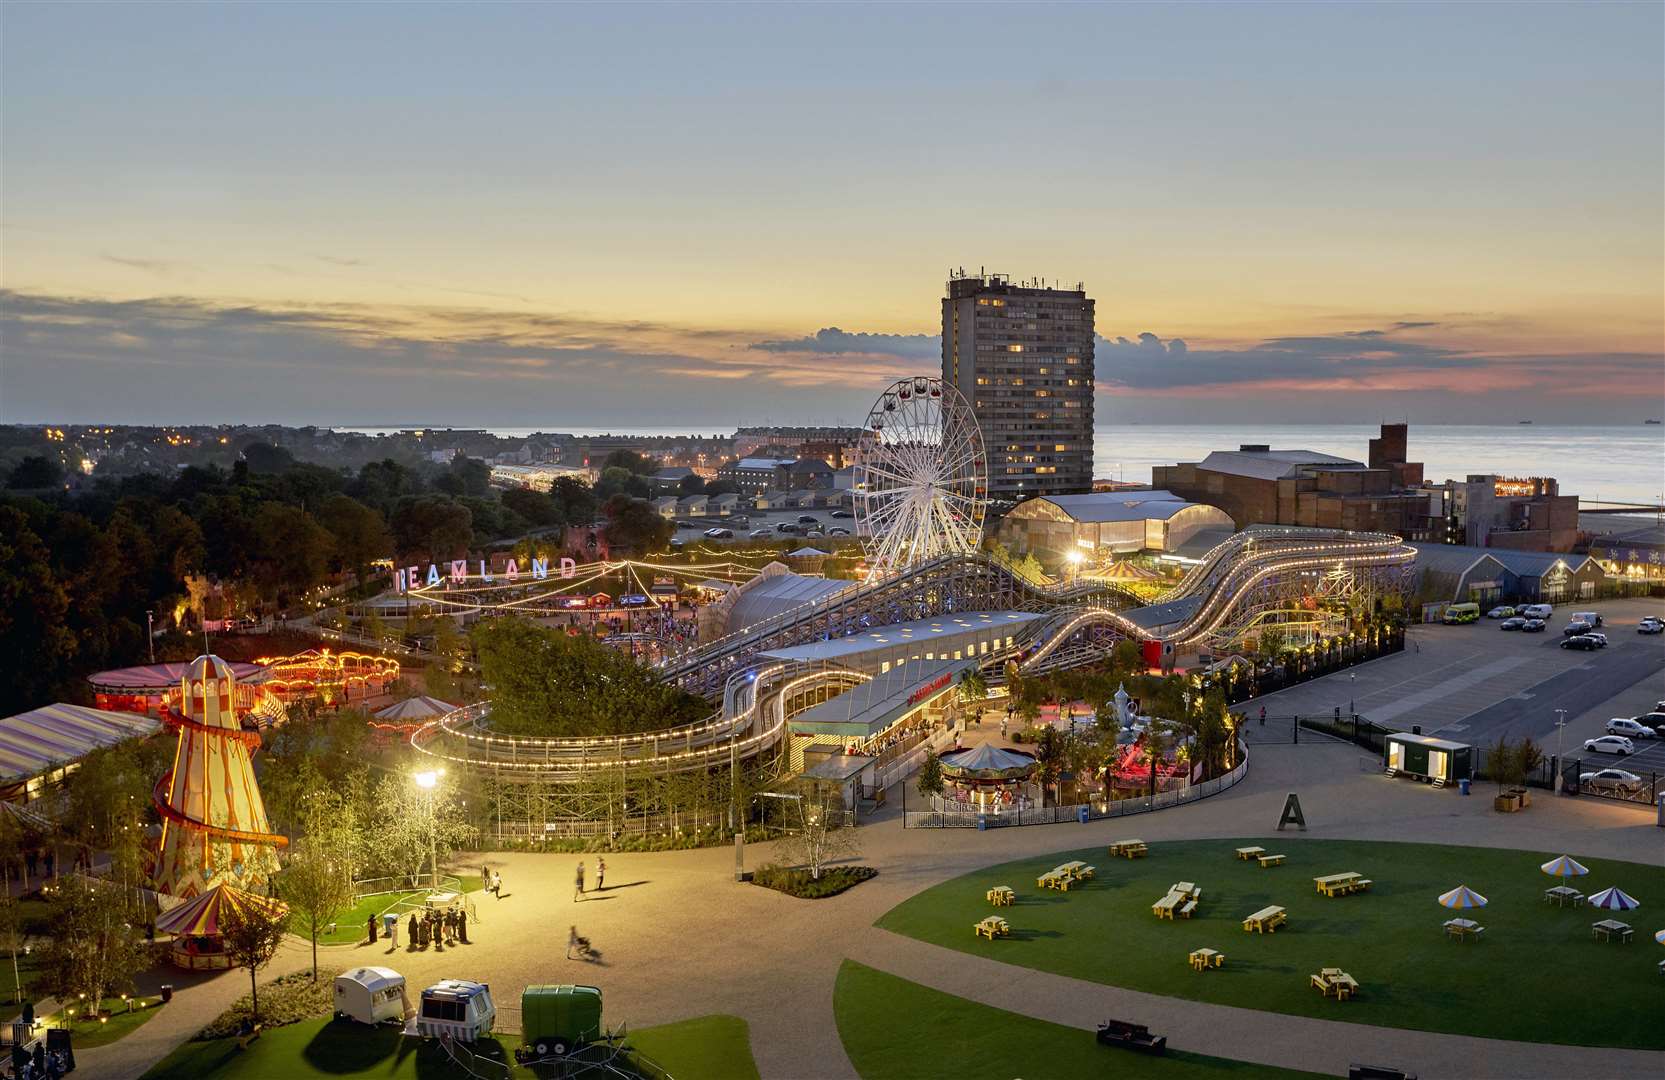 Dreamland Margate has announced eight of its rides will reopen in July